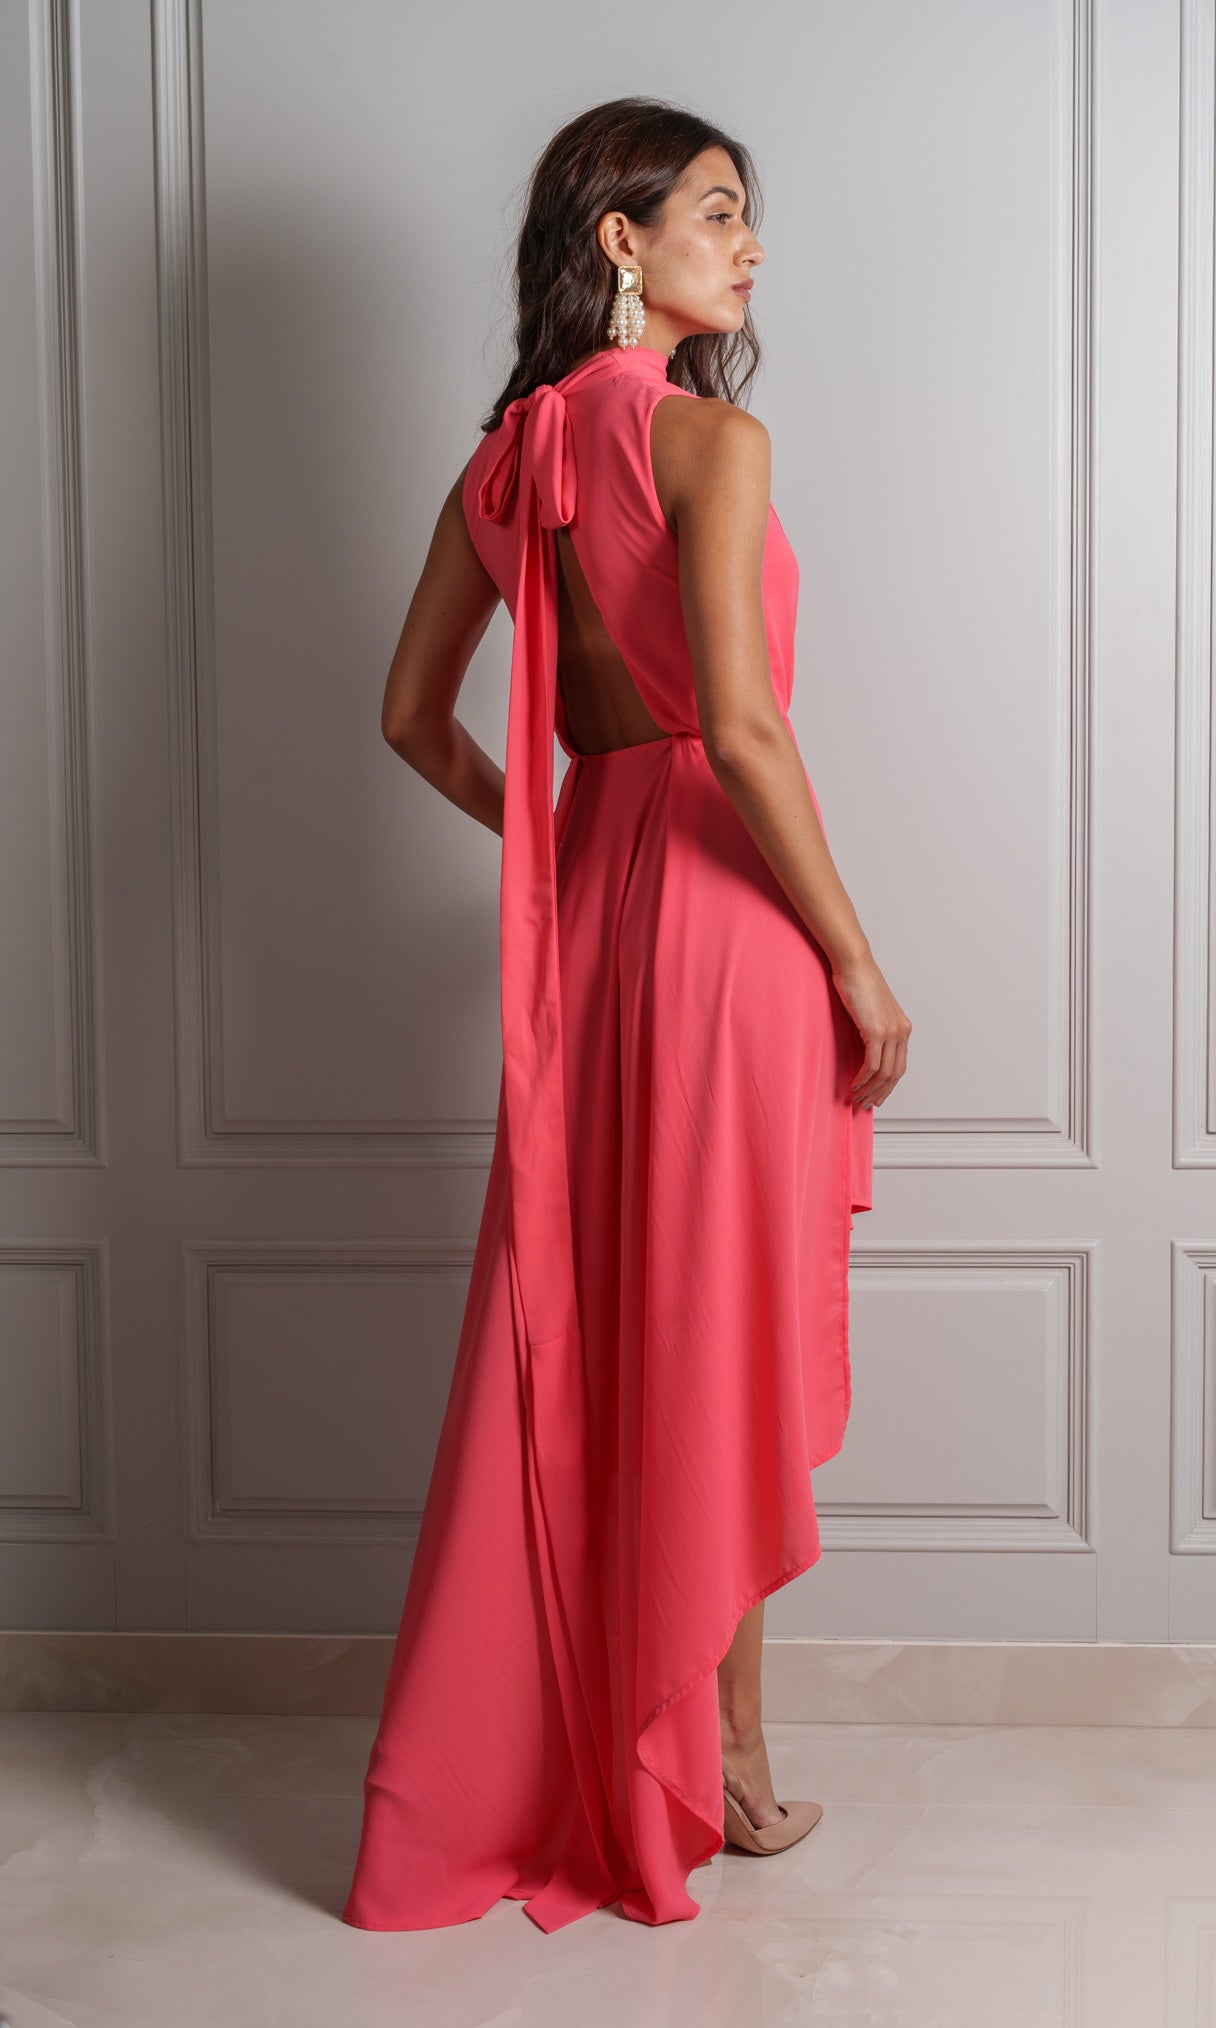 Model wears chiffon fabric dress, lightweight and airy texture drapes softly against the skin in a coral peach colour